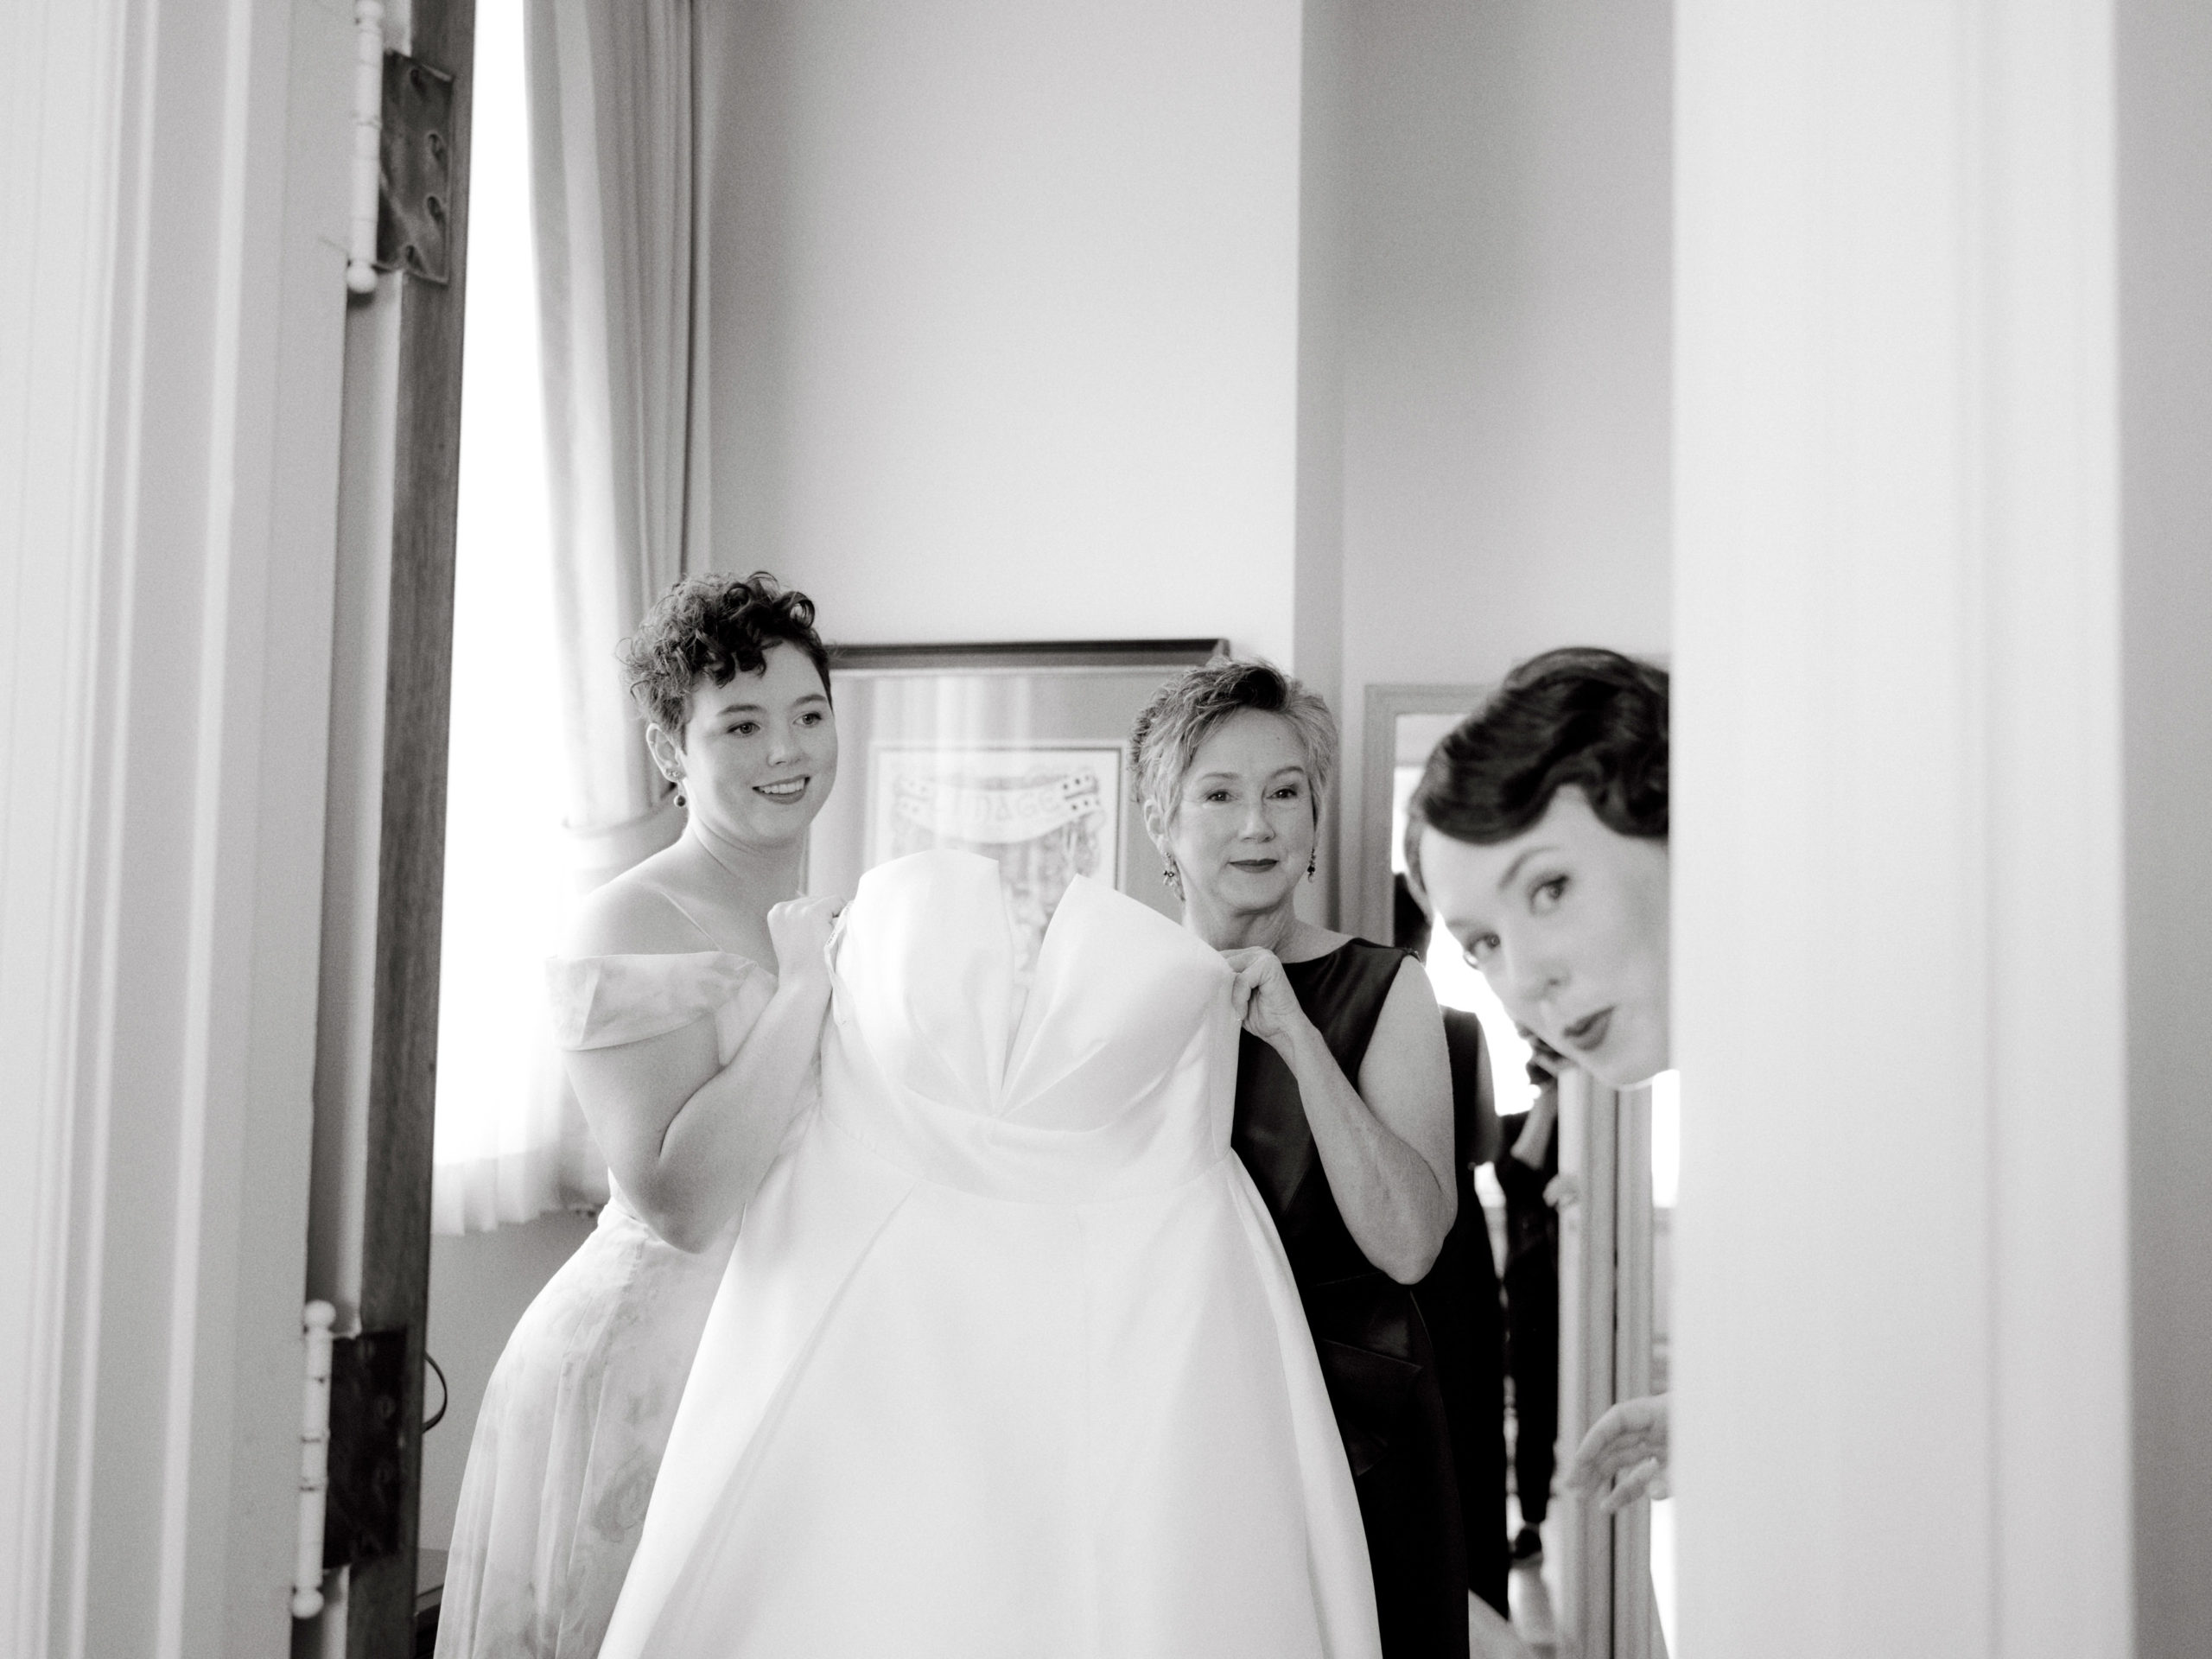 Editorial getting-ready photo with the bride, bride's mother, and bride's sister. Wedding day photo timeline image by Jenny Fu Studio.